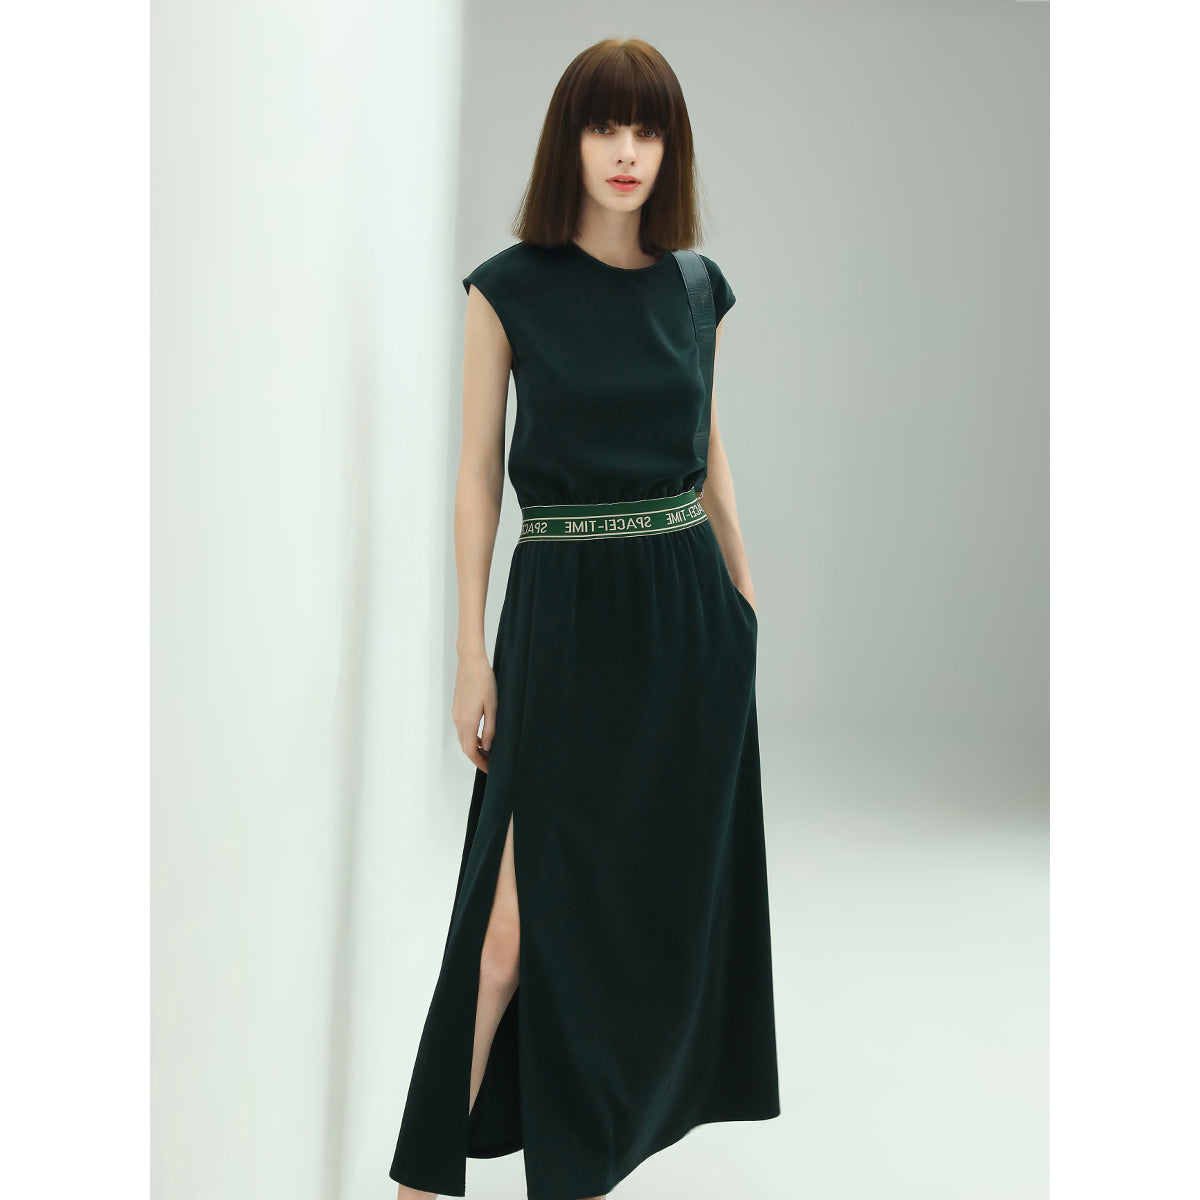 floor-length-liquid-green-dress-with-capped-sleeves_all_green_1.jpg